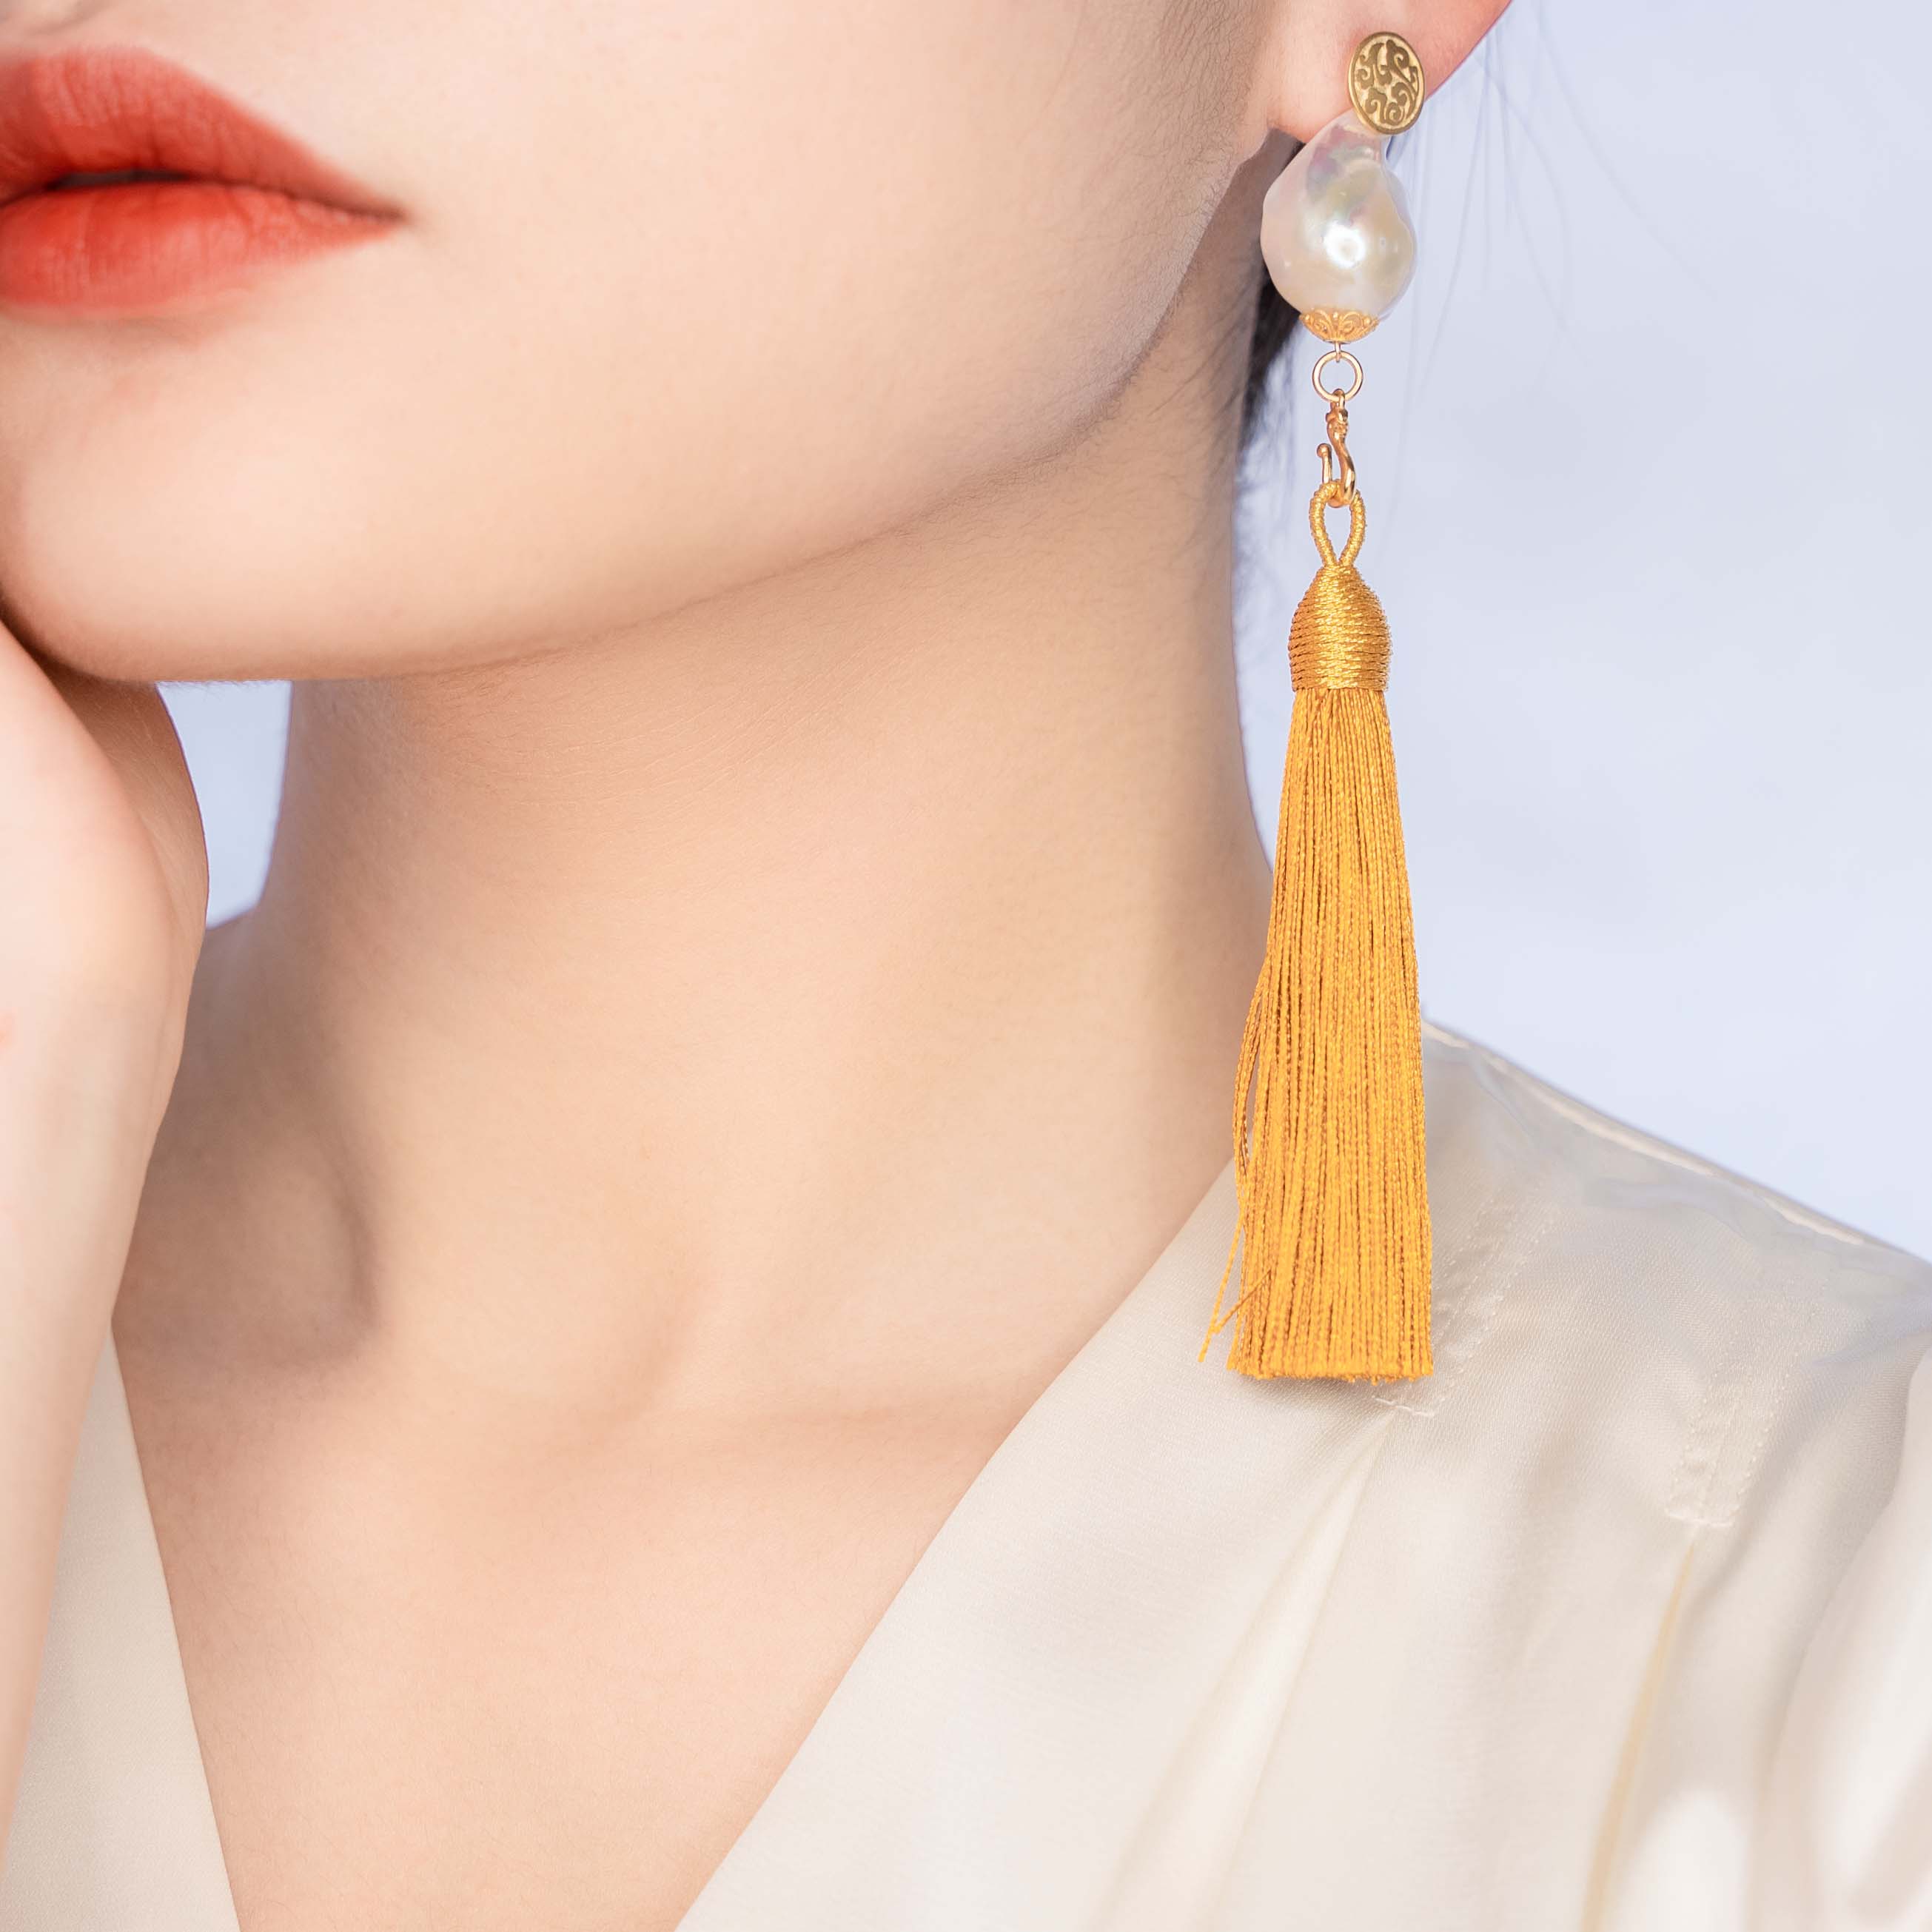 Buy IIK COLLECTION Designer Latest Yellow Leightweight Tassel Bird shape  PomPom Handmade Fabric Drop & Dangler Earrings for Wedding & Party - Women  and Girls Online at Best Prices in India - JioMart.